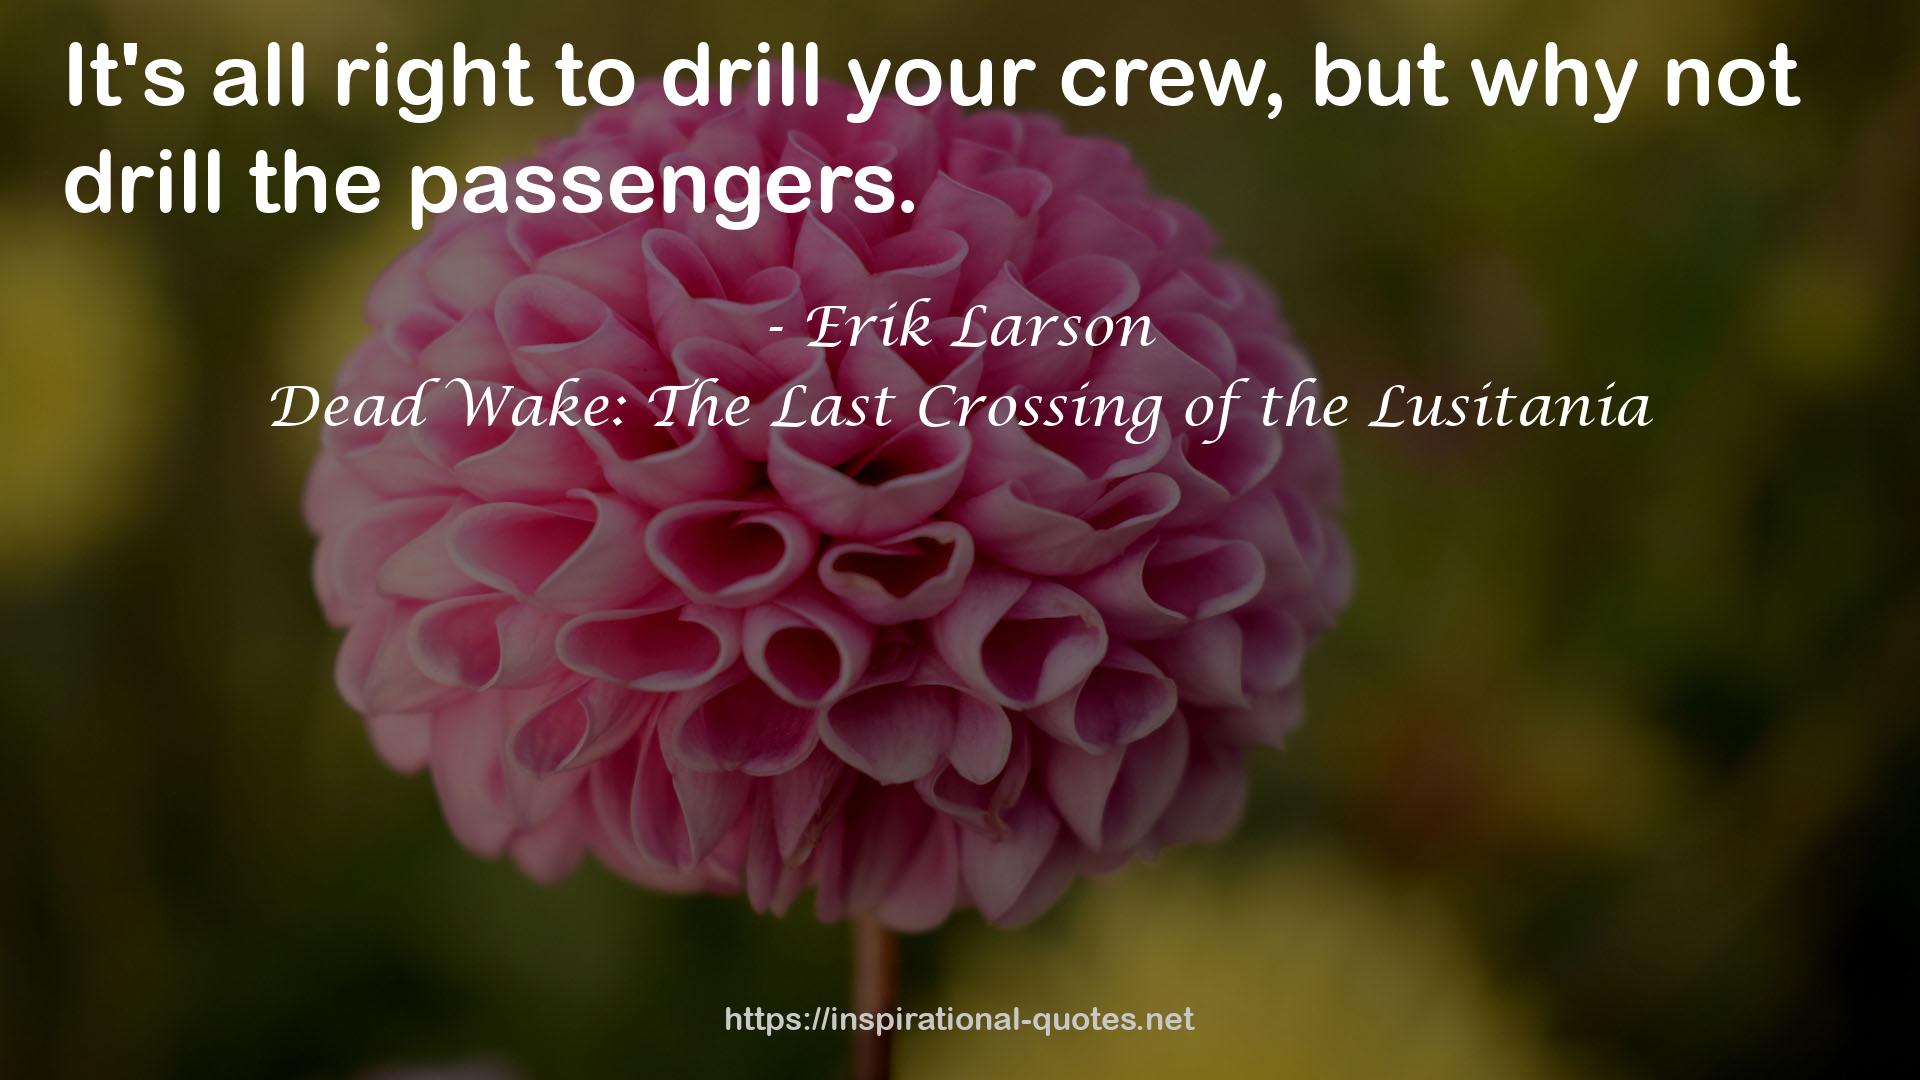 Dead Wake: The Last Crossing of the Lusitania QUOTES